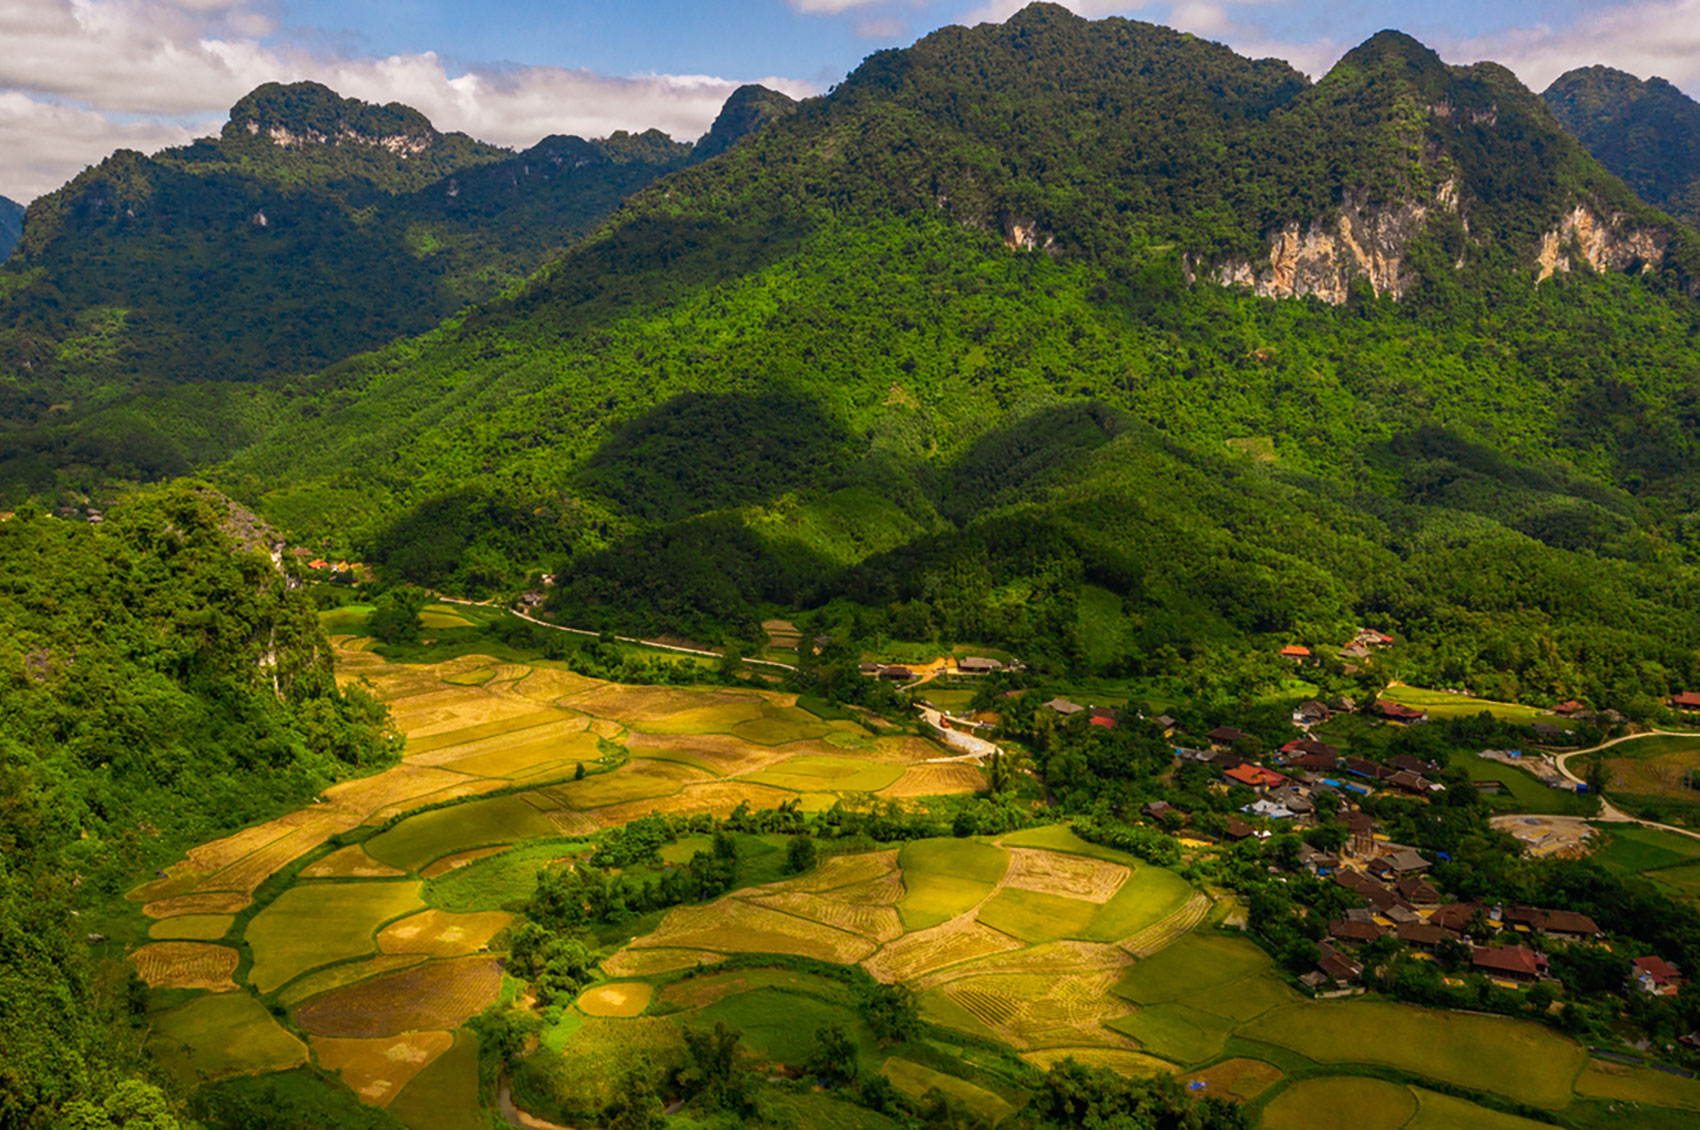 Vietnamese landscape with forested mountains, fields and a small village. Copyright: © GIZ / Binh Dang